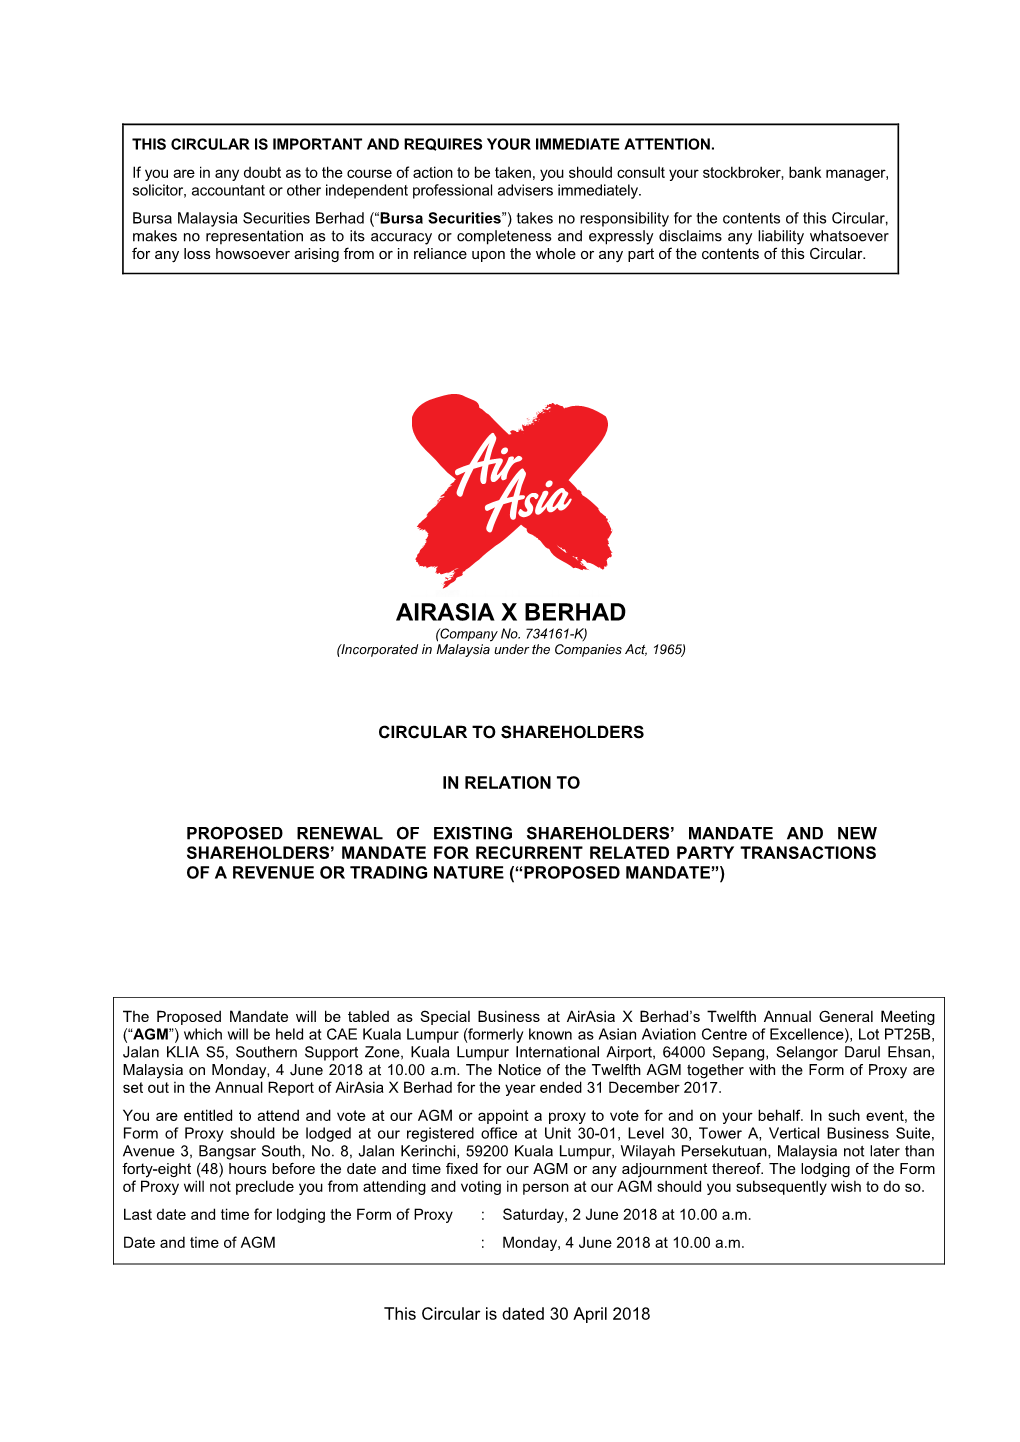 AAX Or Our : Airasia X Berhad (Company No.: 734161-K), Incorporated in Malaysia Company Or Company